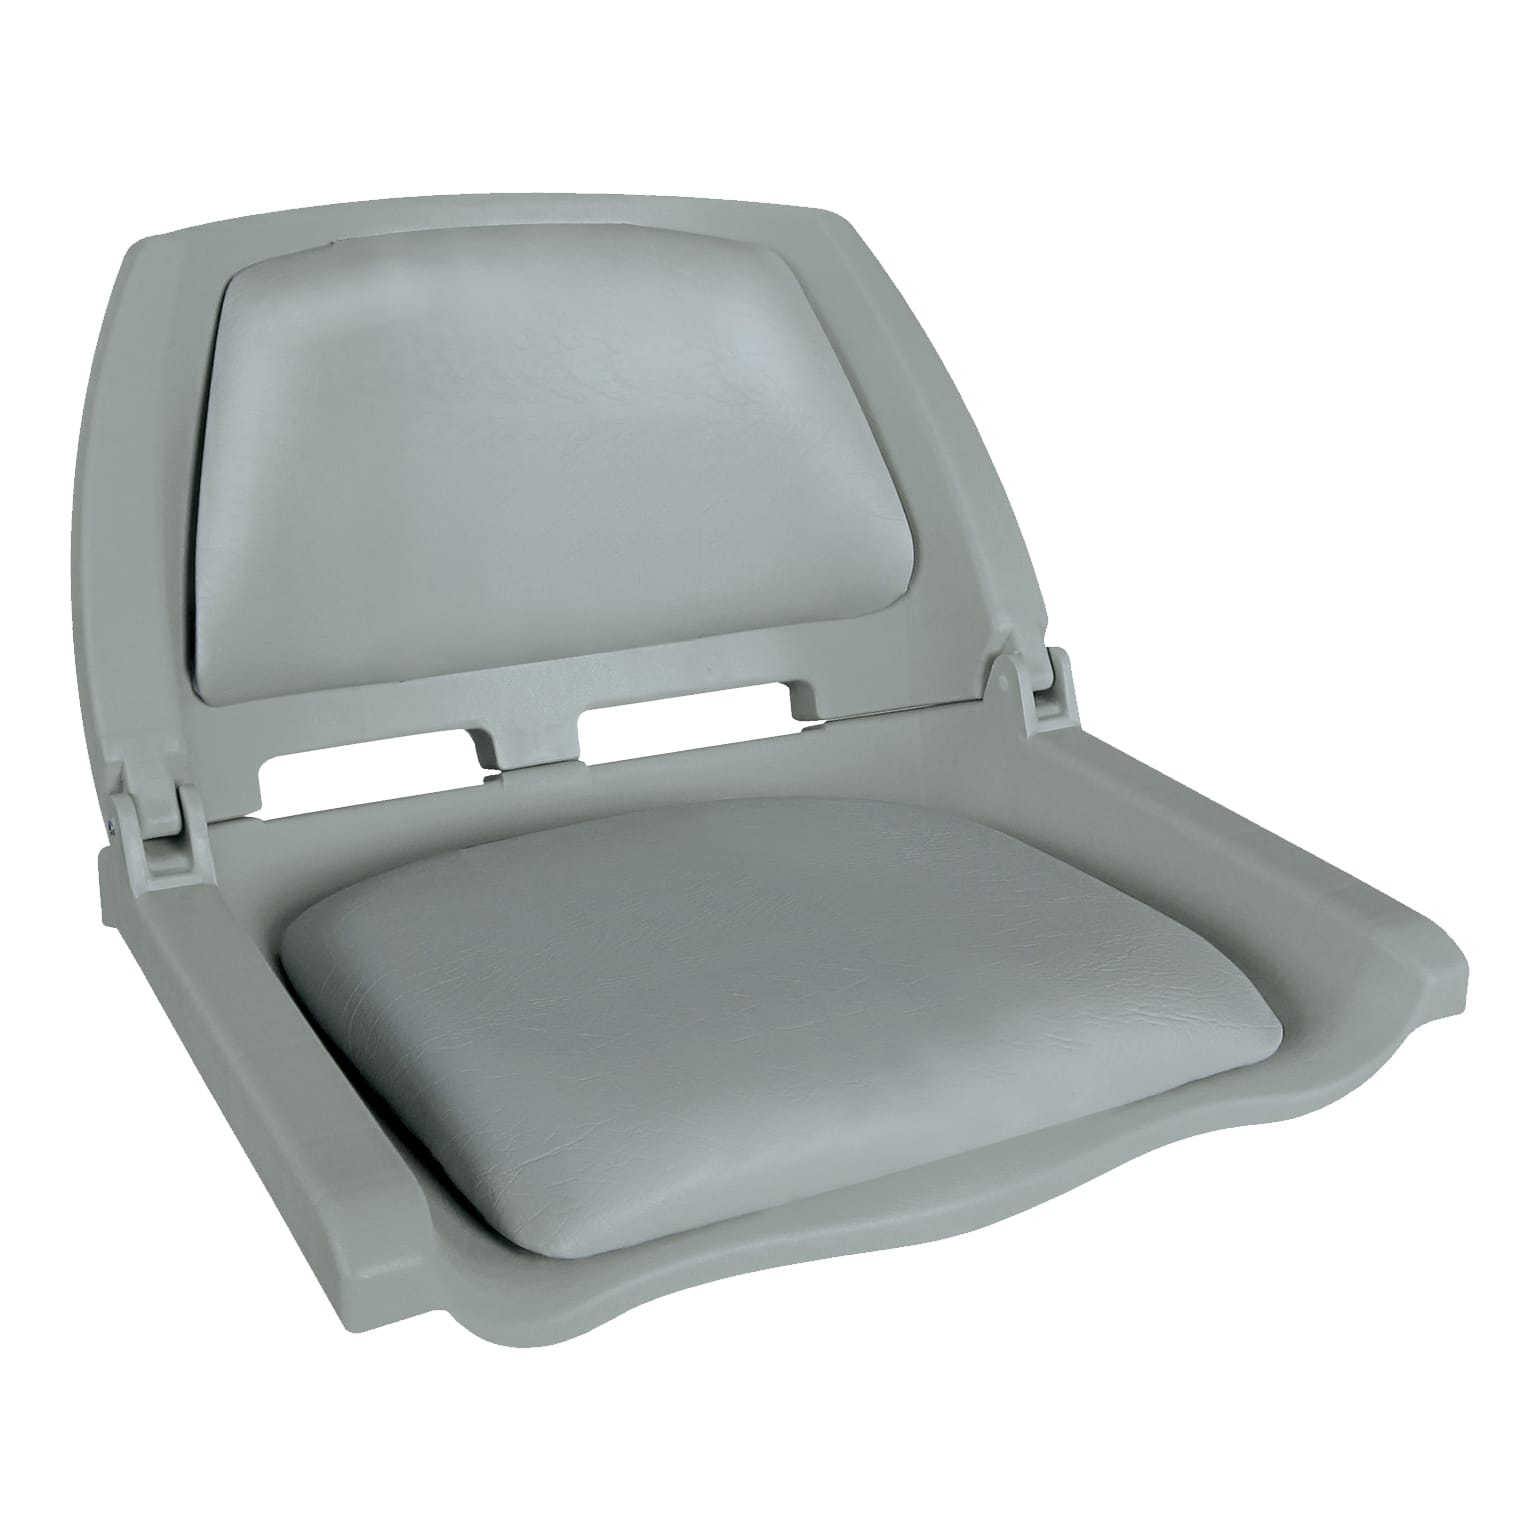 Helm seat - 60195 - Tempress - for sport fishing boats / fold-down /  1-person